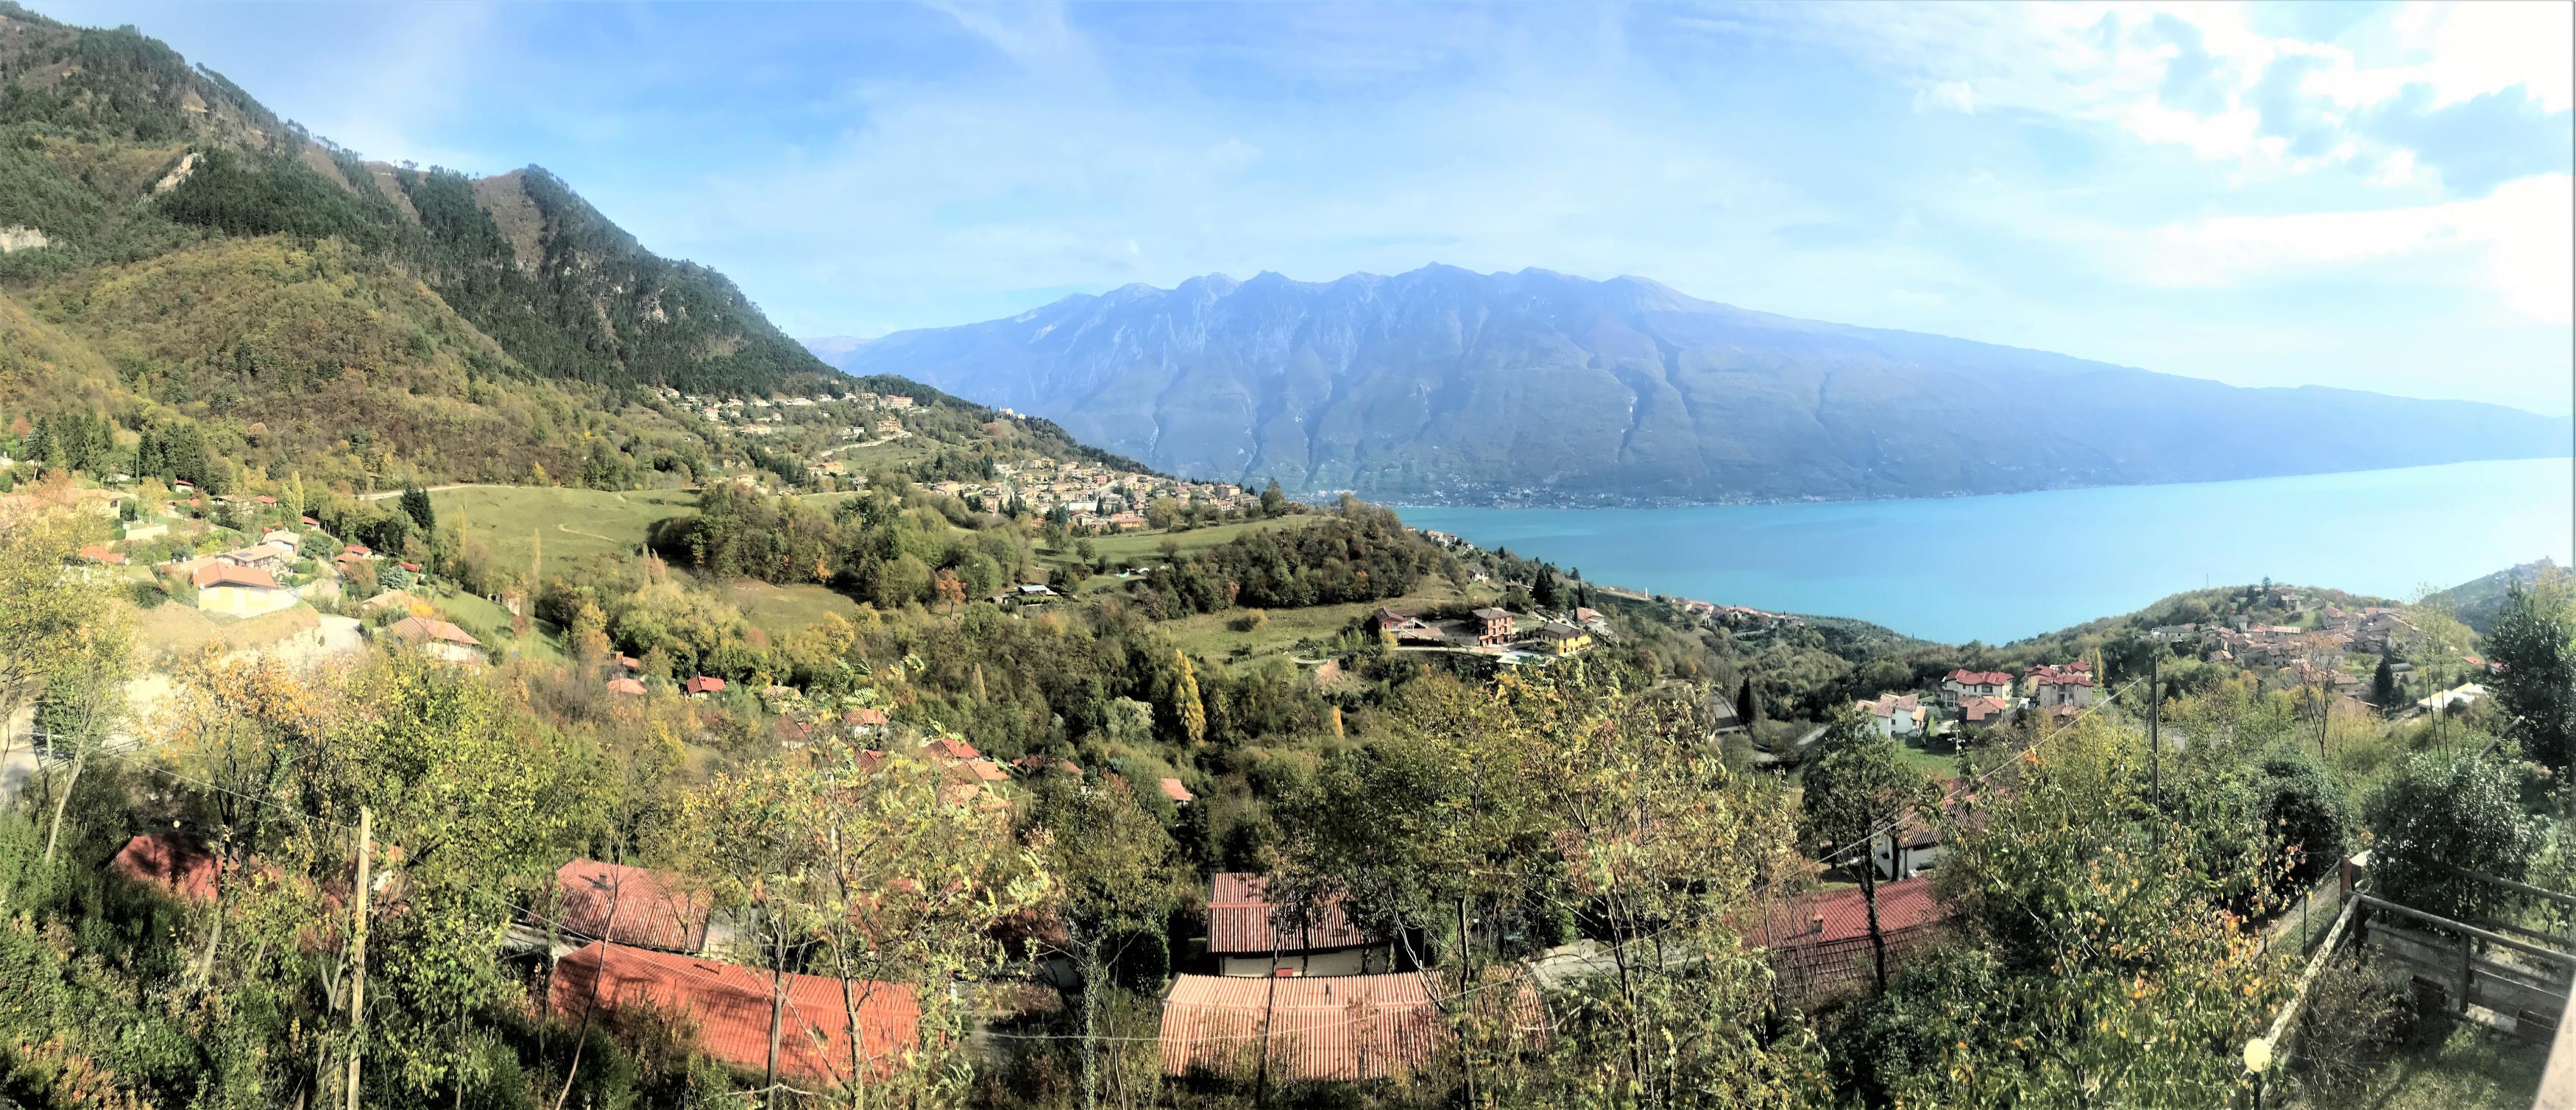 HOLIDAY HOUSE LAKE GARDA- IDEAL FOR YOUR FAMILY HOLIDAY